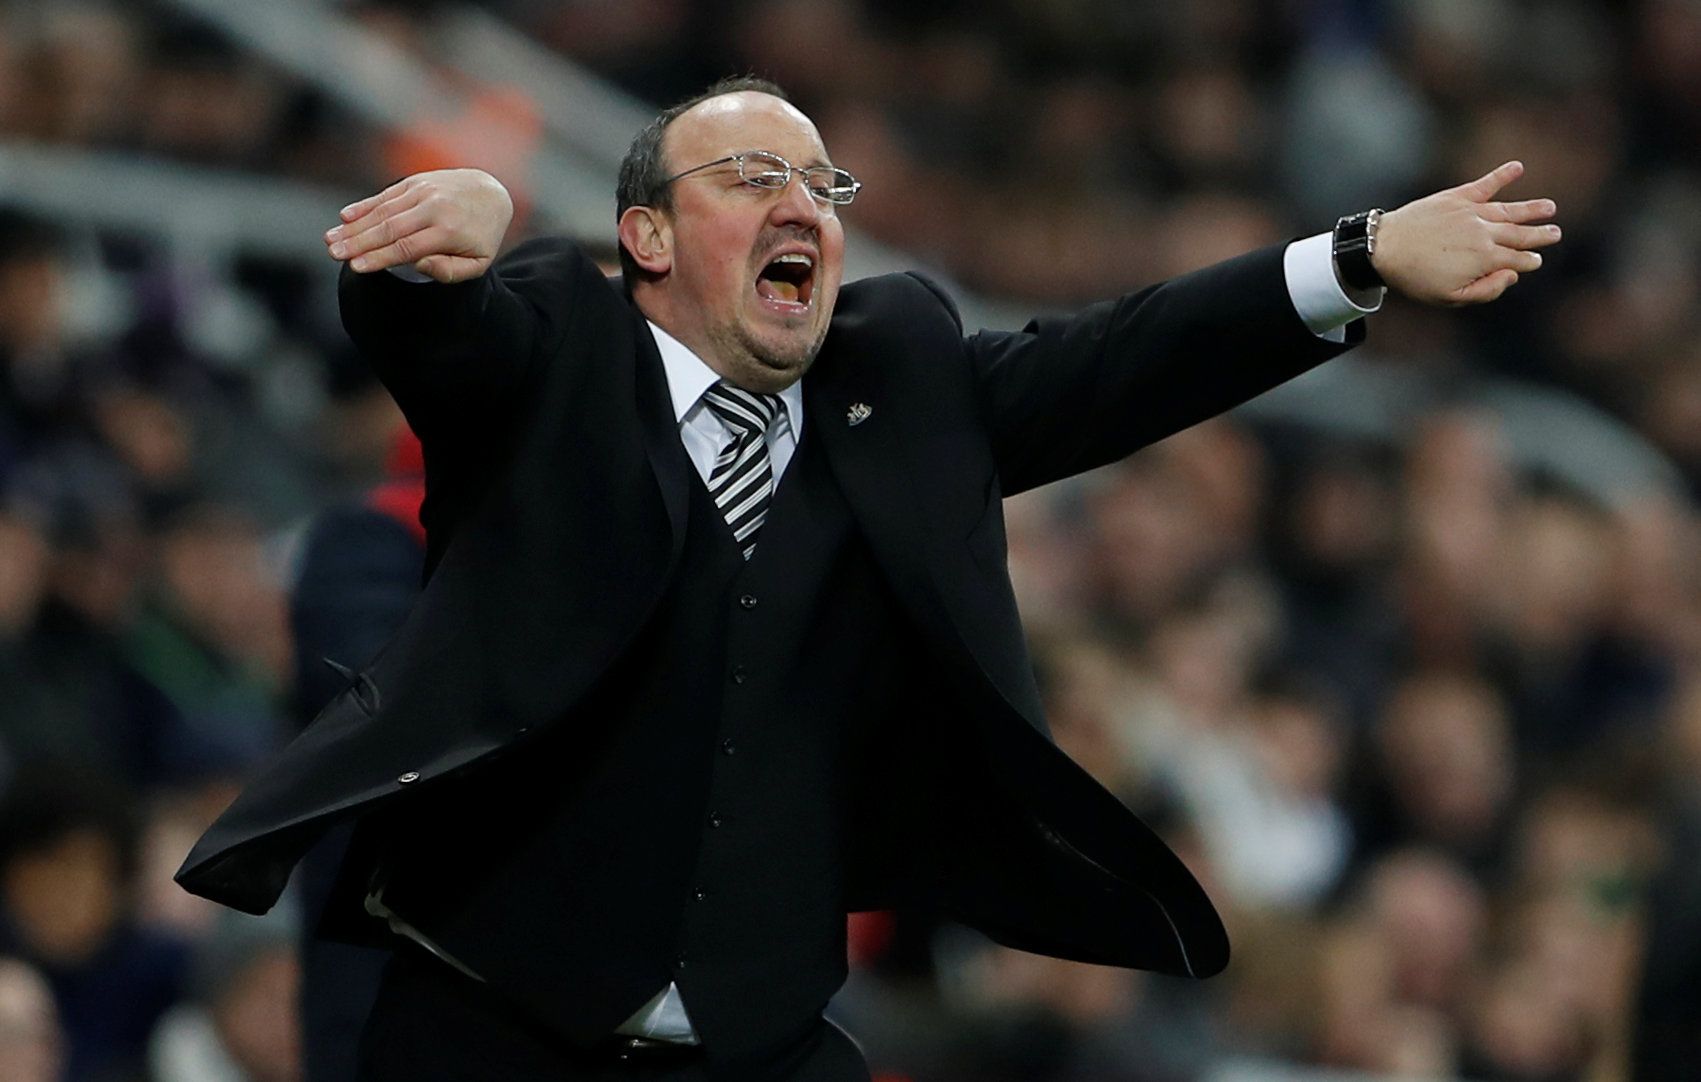 Soccer Football - Premier League - Newcastle United vs Swansea City - St James' Park, Newcastle, Britain - January 13, 2018   Newcastle United manager Rafael Benitez                    Action Images via Reuters/Lee Smith    EDITORIAL USE ONLY. No use with unauthorized audio, video, data, fixture lists, club/league logos or 